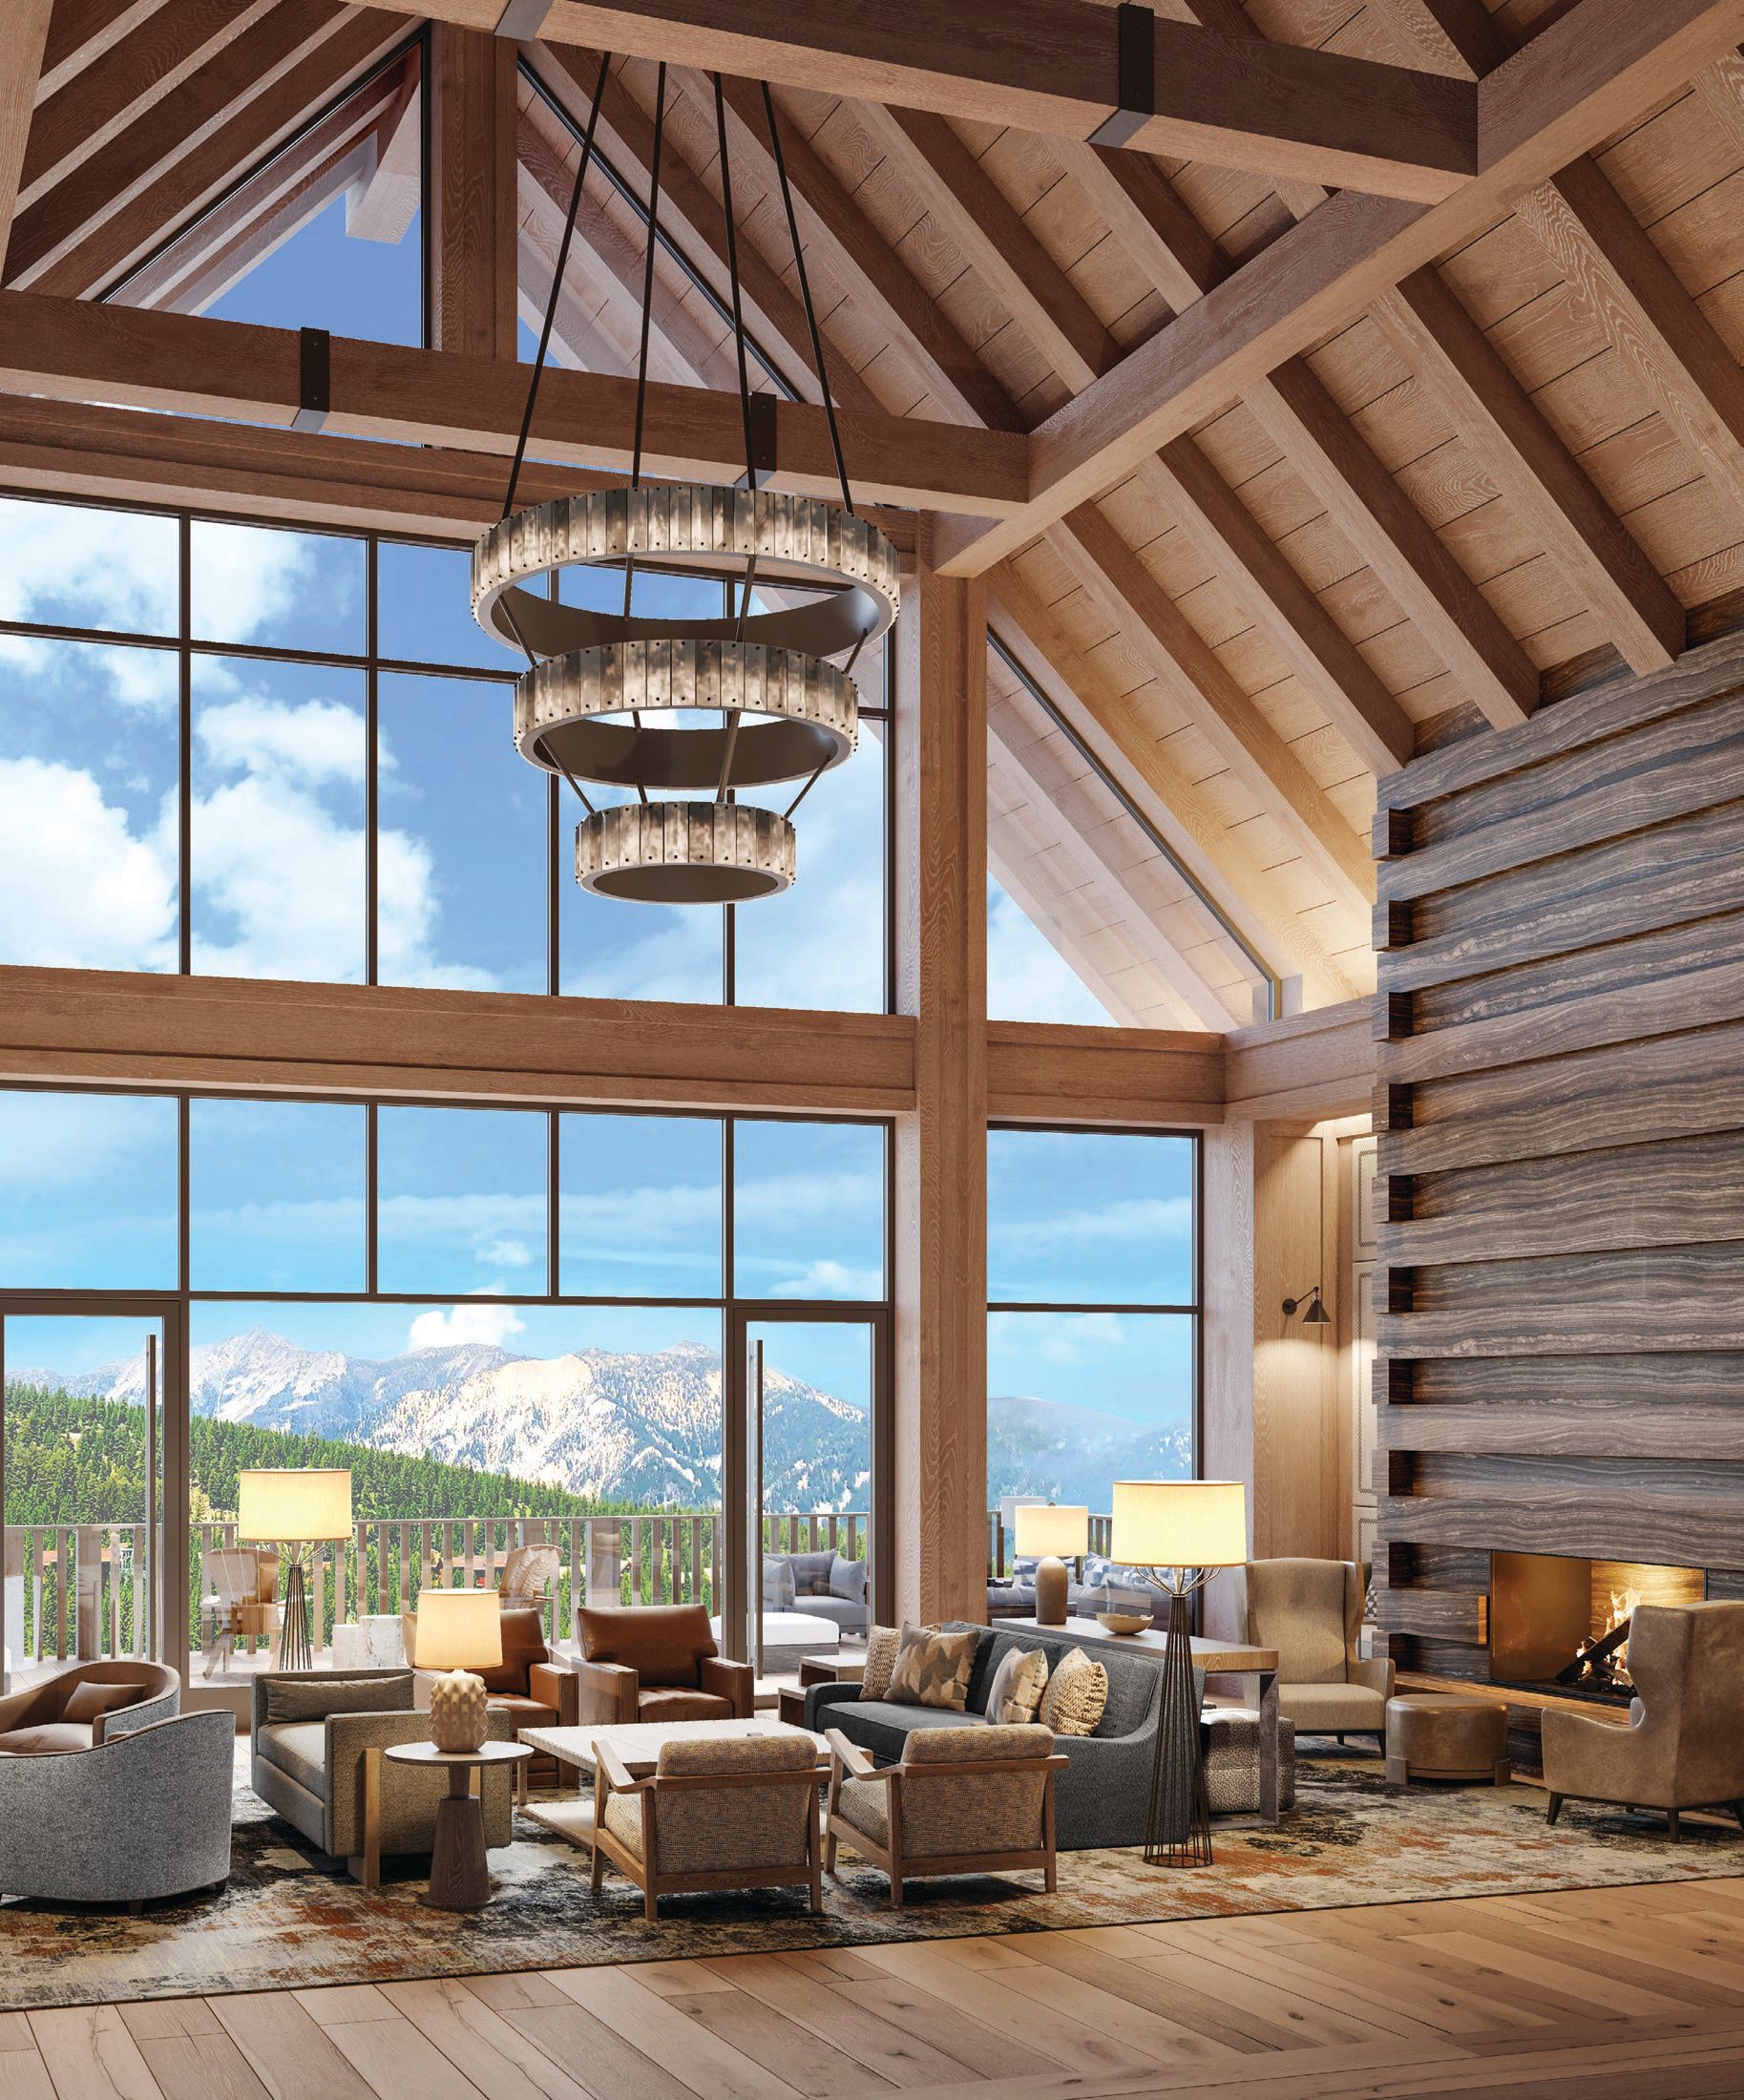 Views of the spectacular Spanish Peaks abound from the cozy interiors at Montage Big Sky. MONTAGE BIG SKY PHOTO COURTESY OF BRAND; SKI PHOTO COURTESY OF BIG SKY RESORT